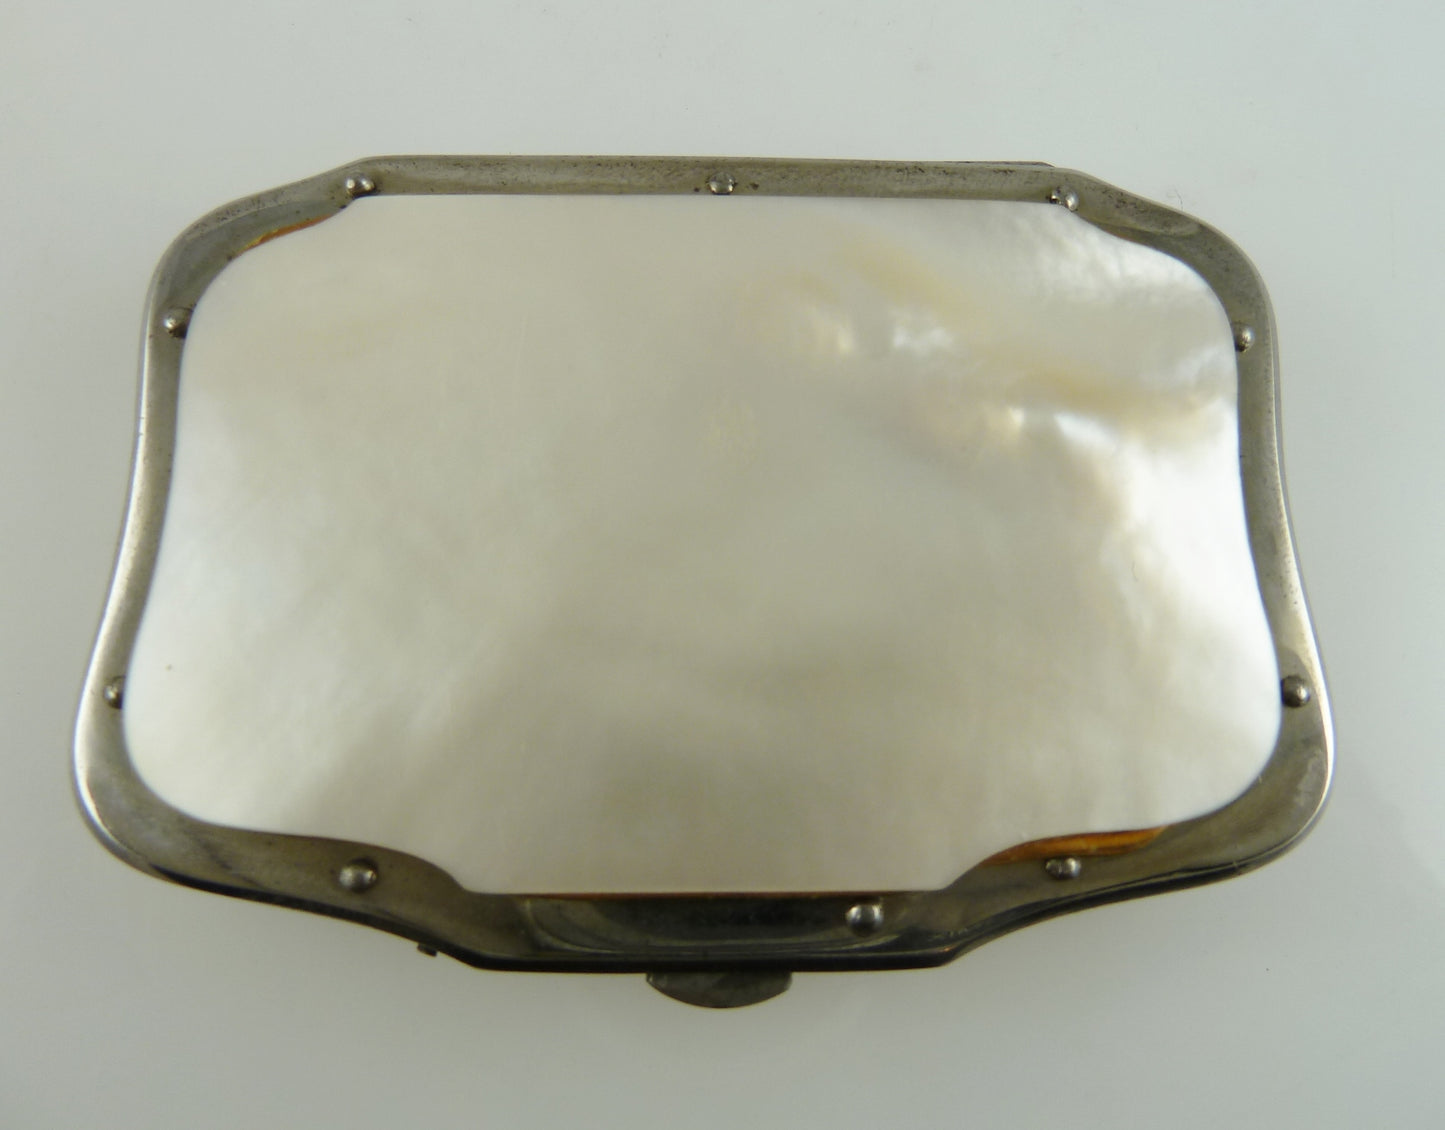 Antique French Silver Change Coin Purse Necessaire with Mother of Pearl - 43 Chesapeake Court Antiques